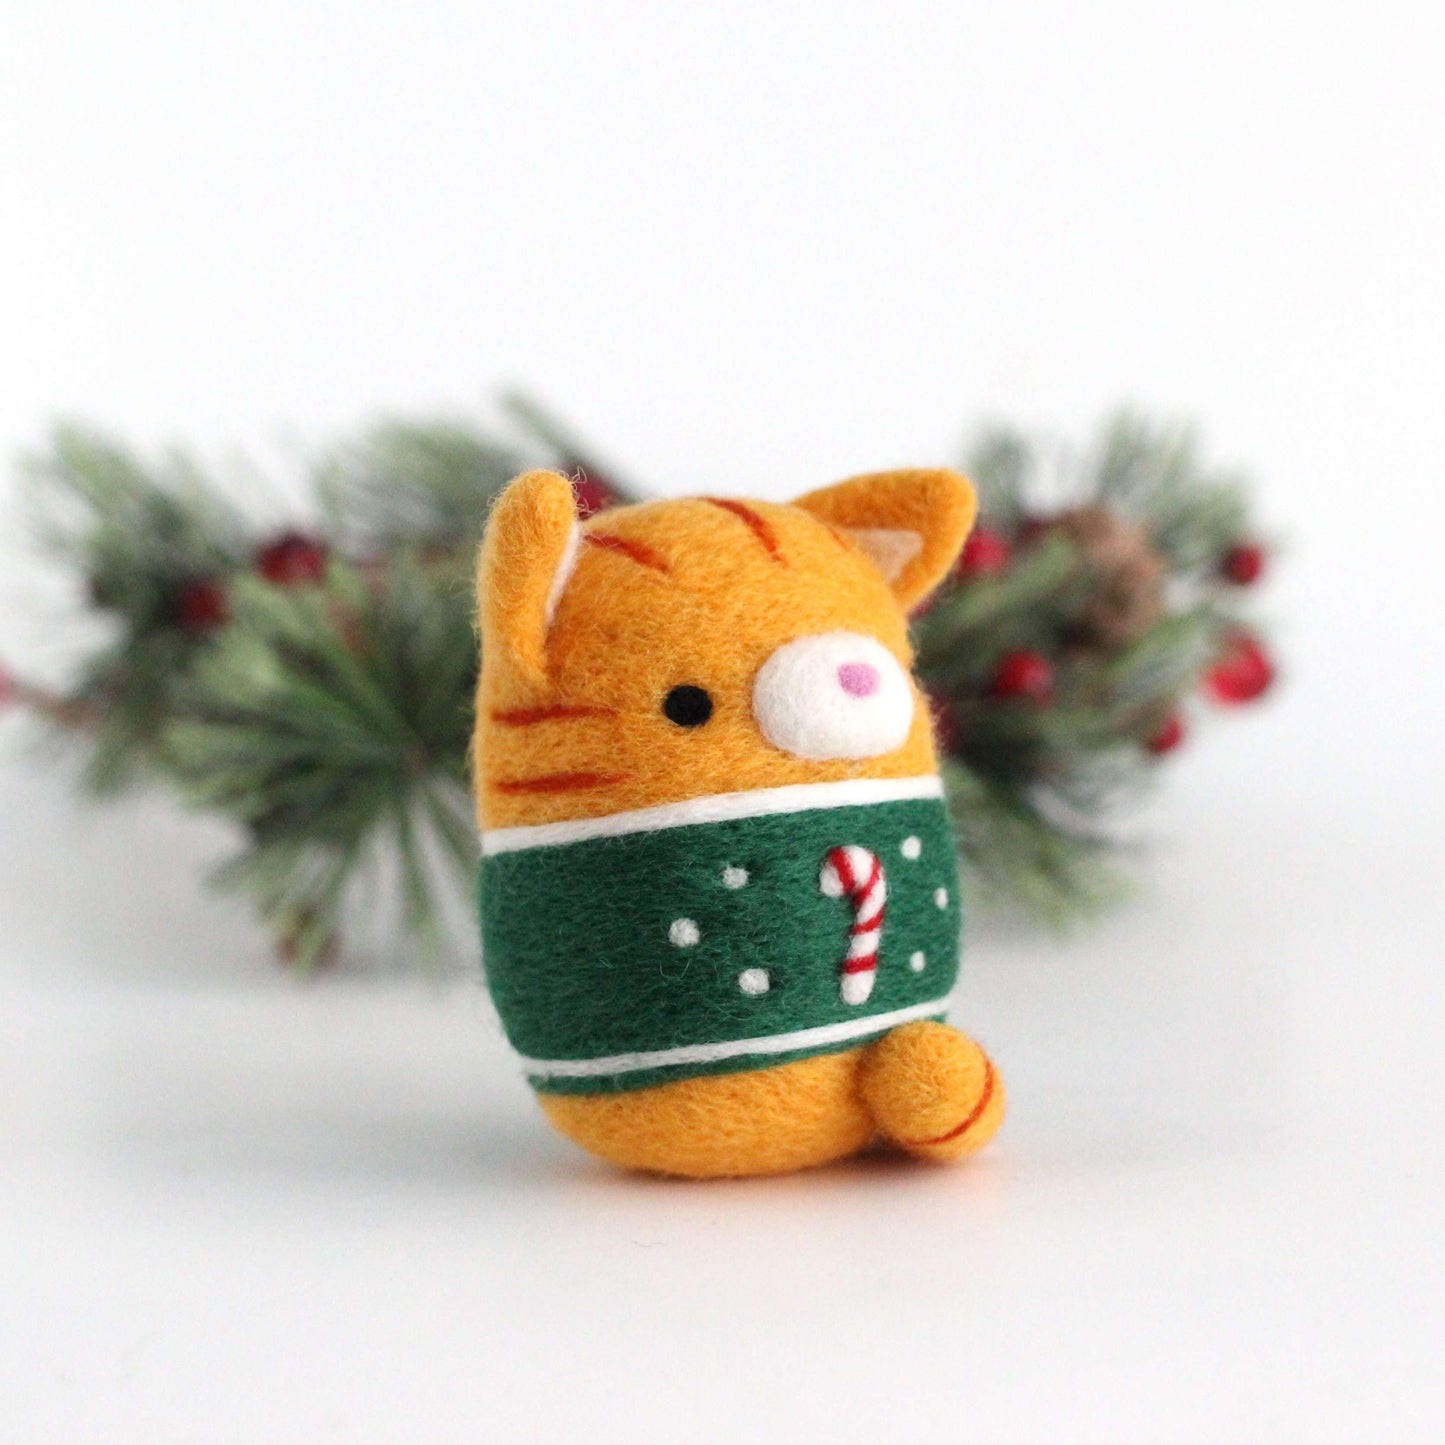 Needle Felted Ginger Tabby Cat in Candy Cane Christmas Sweater